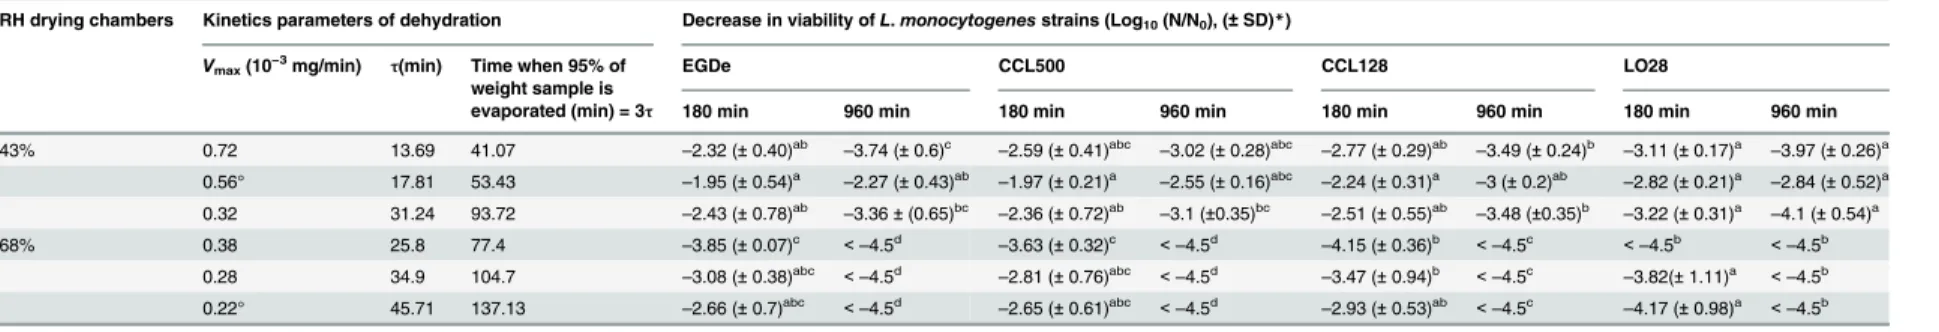 Table 1. Drying parameters and viability of Listeria monocytogenes dried at 25°C at various dehydration kinetics.